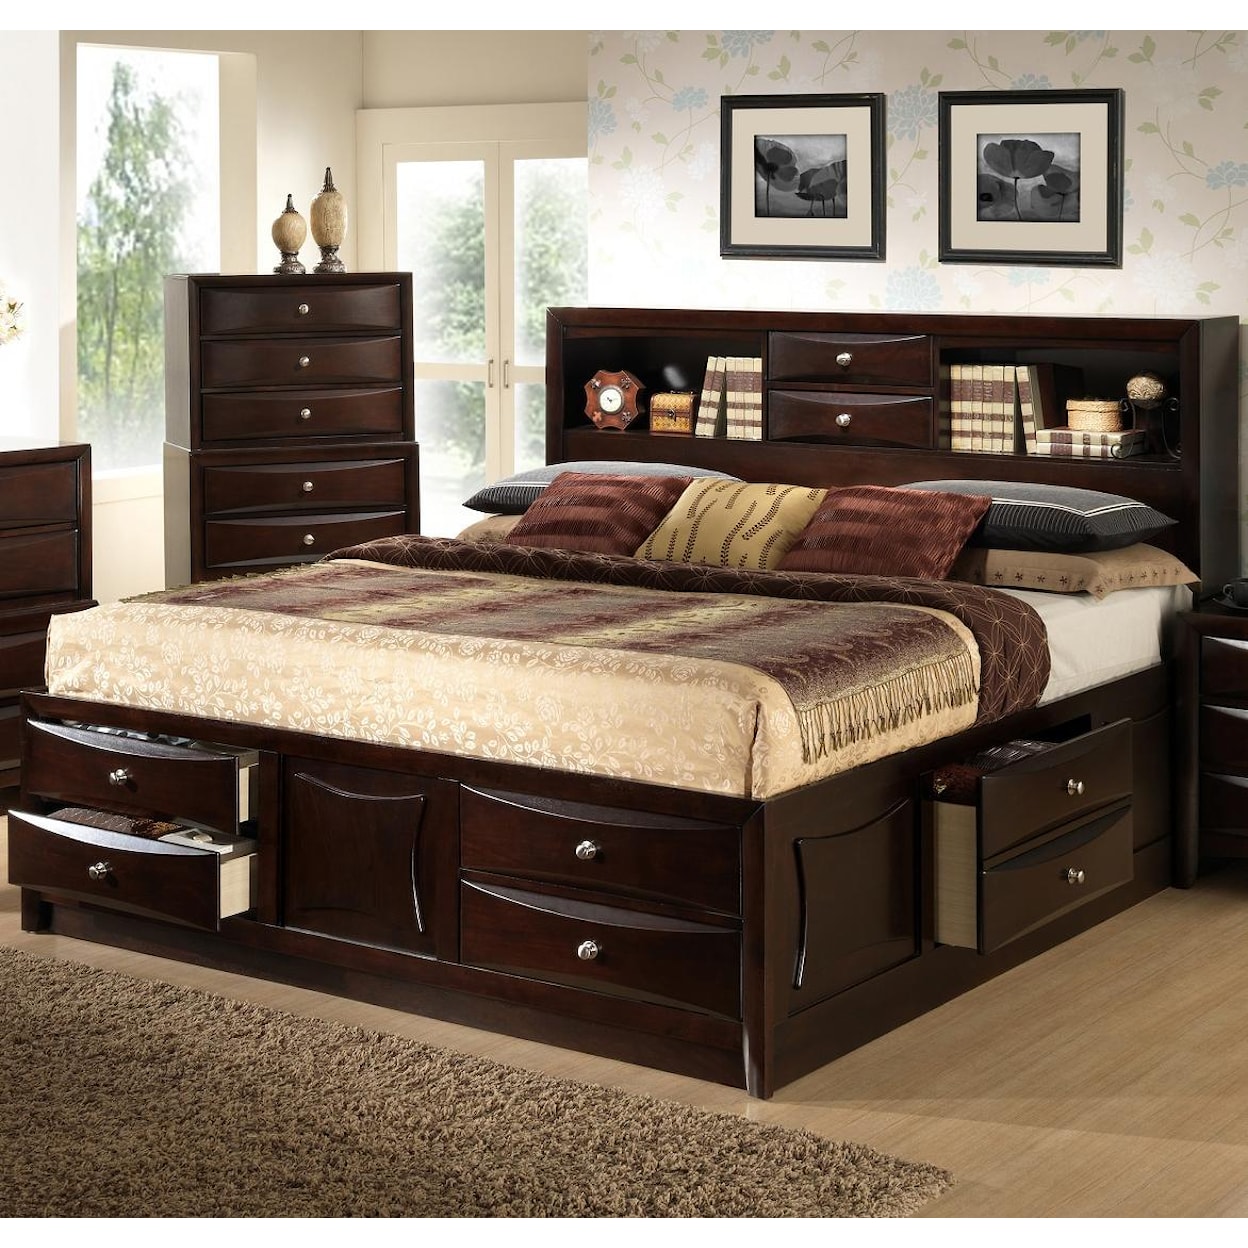 Lifestyle C0172A King/ California King Storage Bed